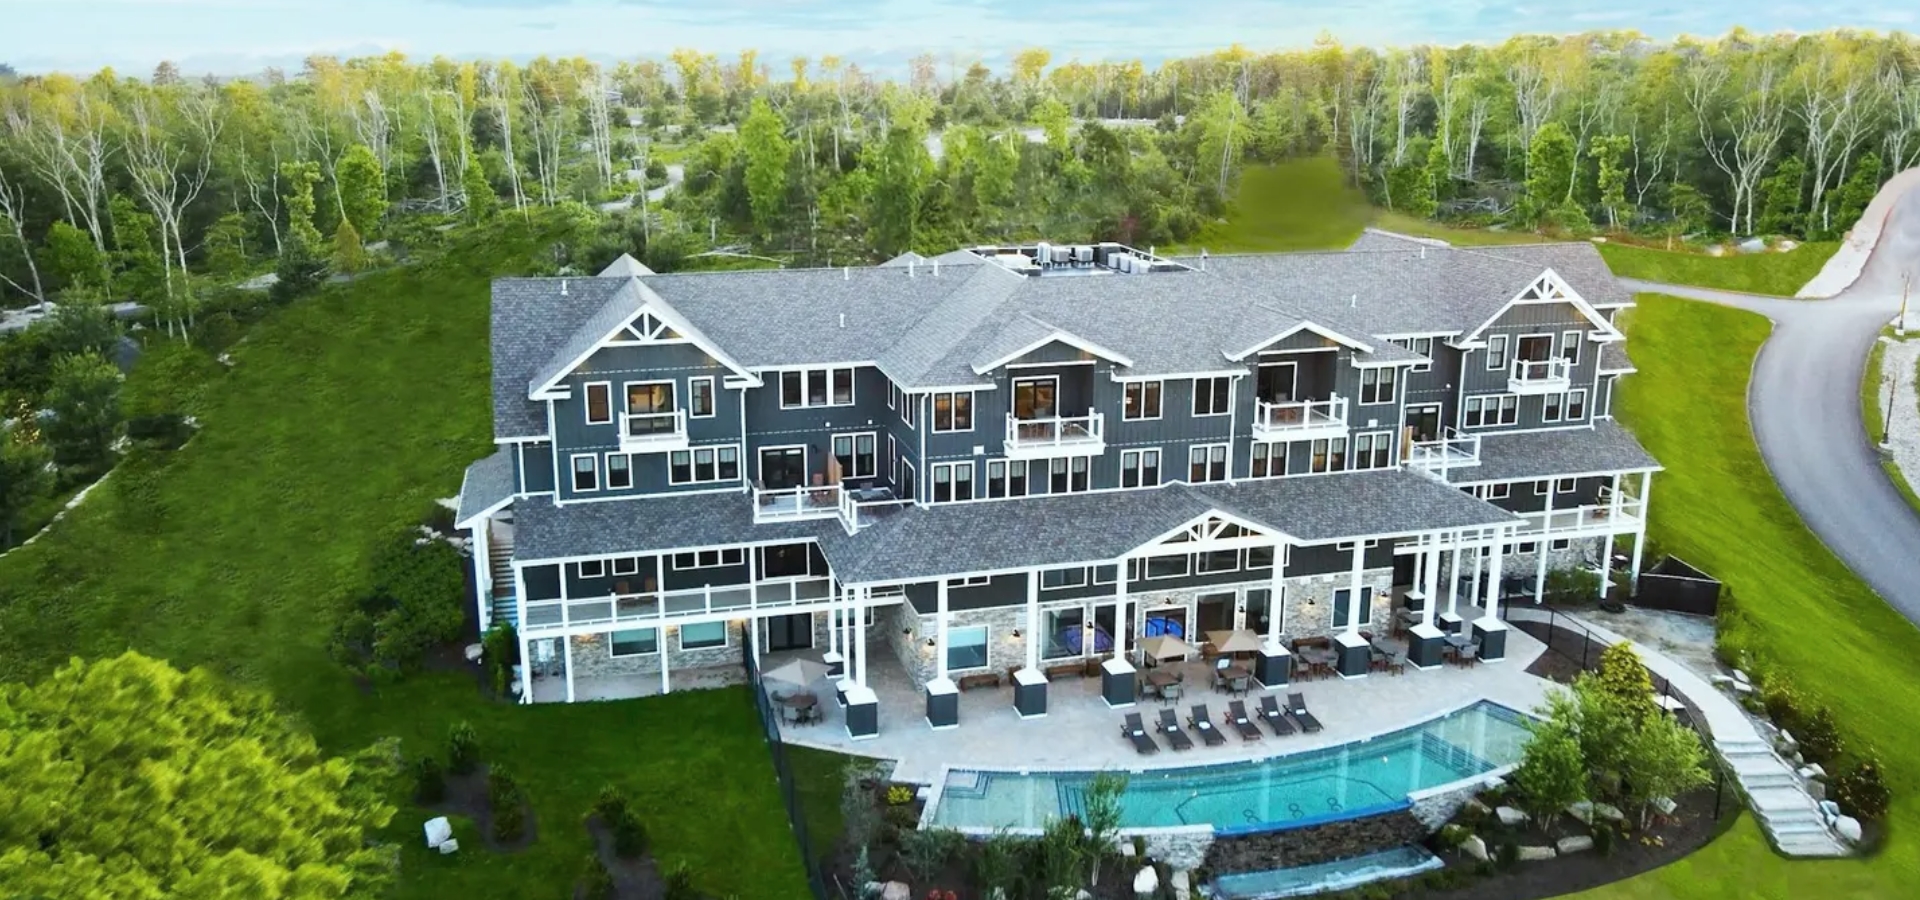 Experience the grandeur of The Preserve Resort & Spa, Rhode Island from above